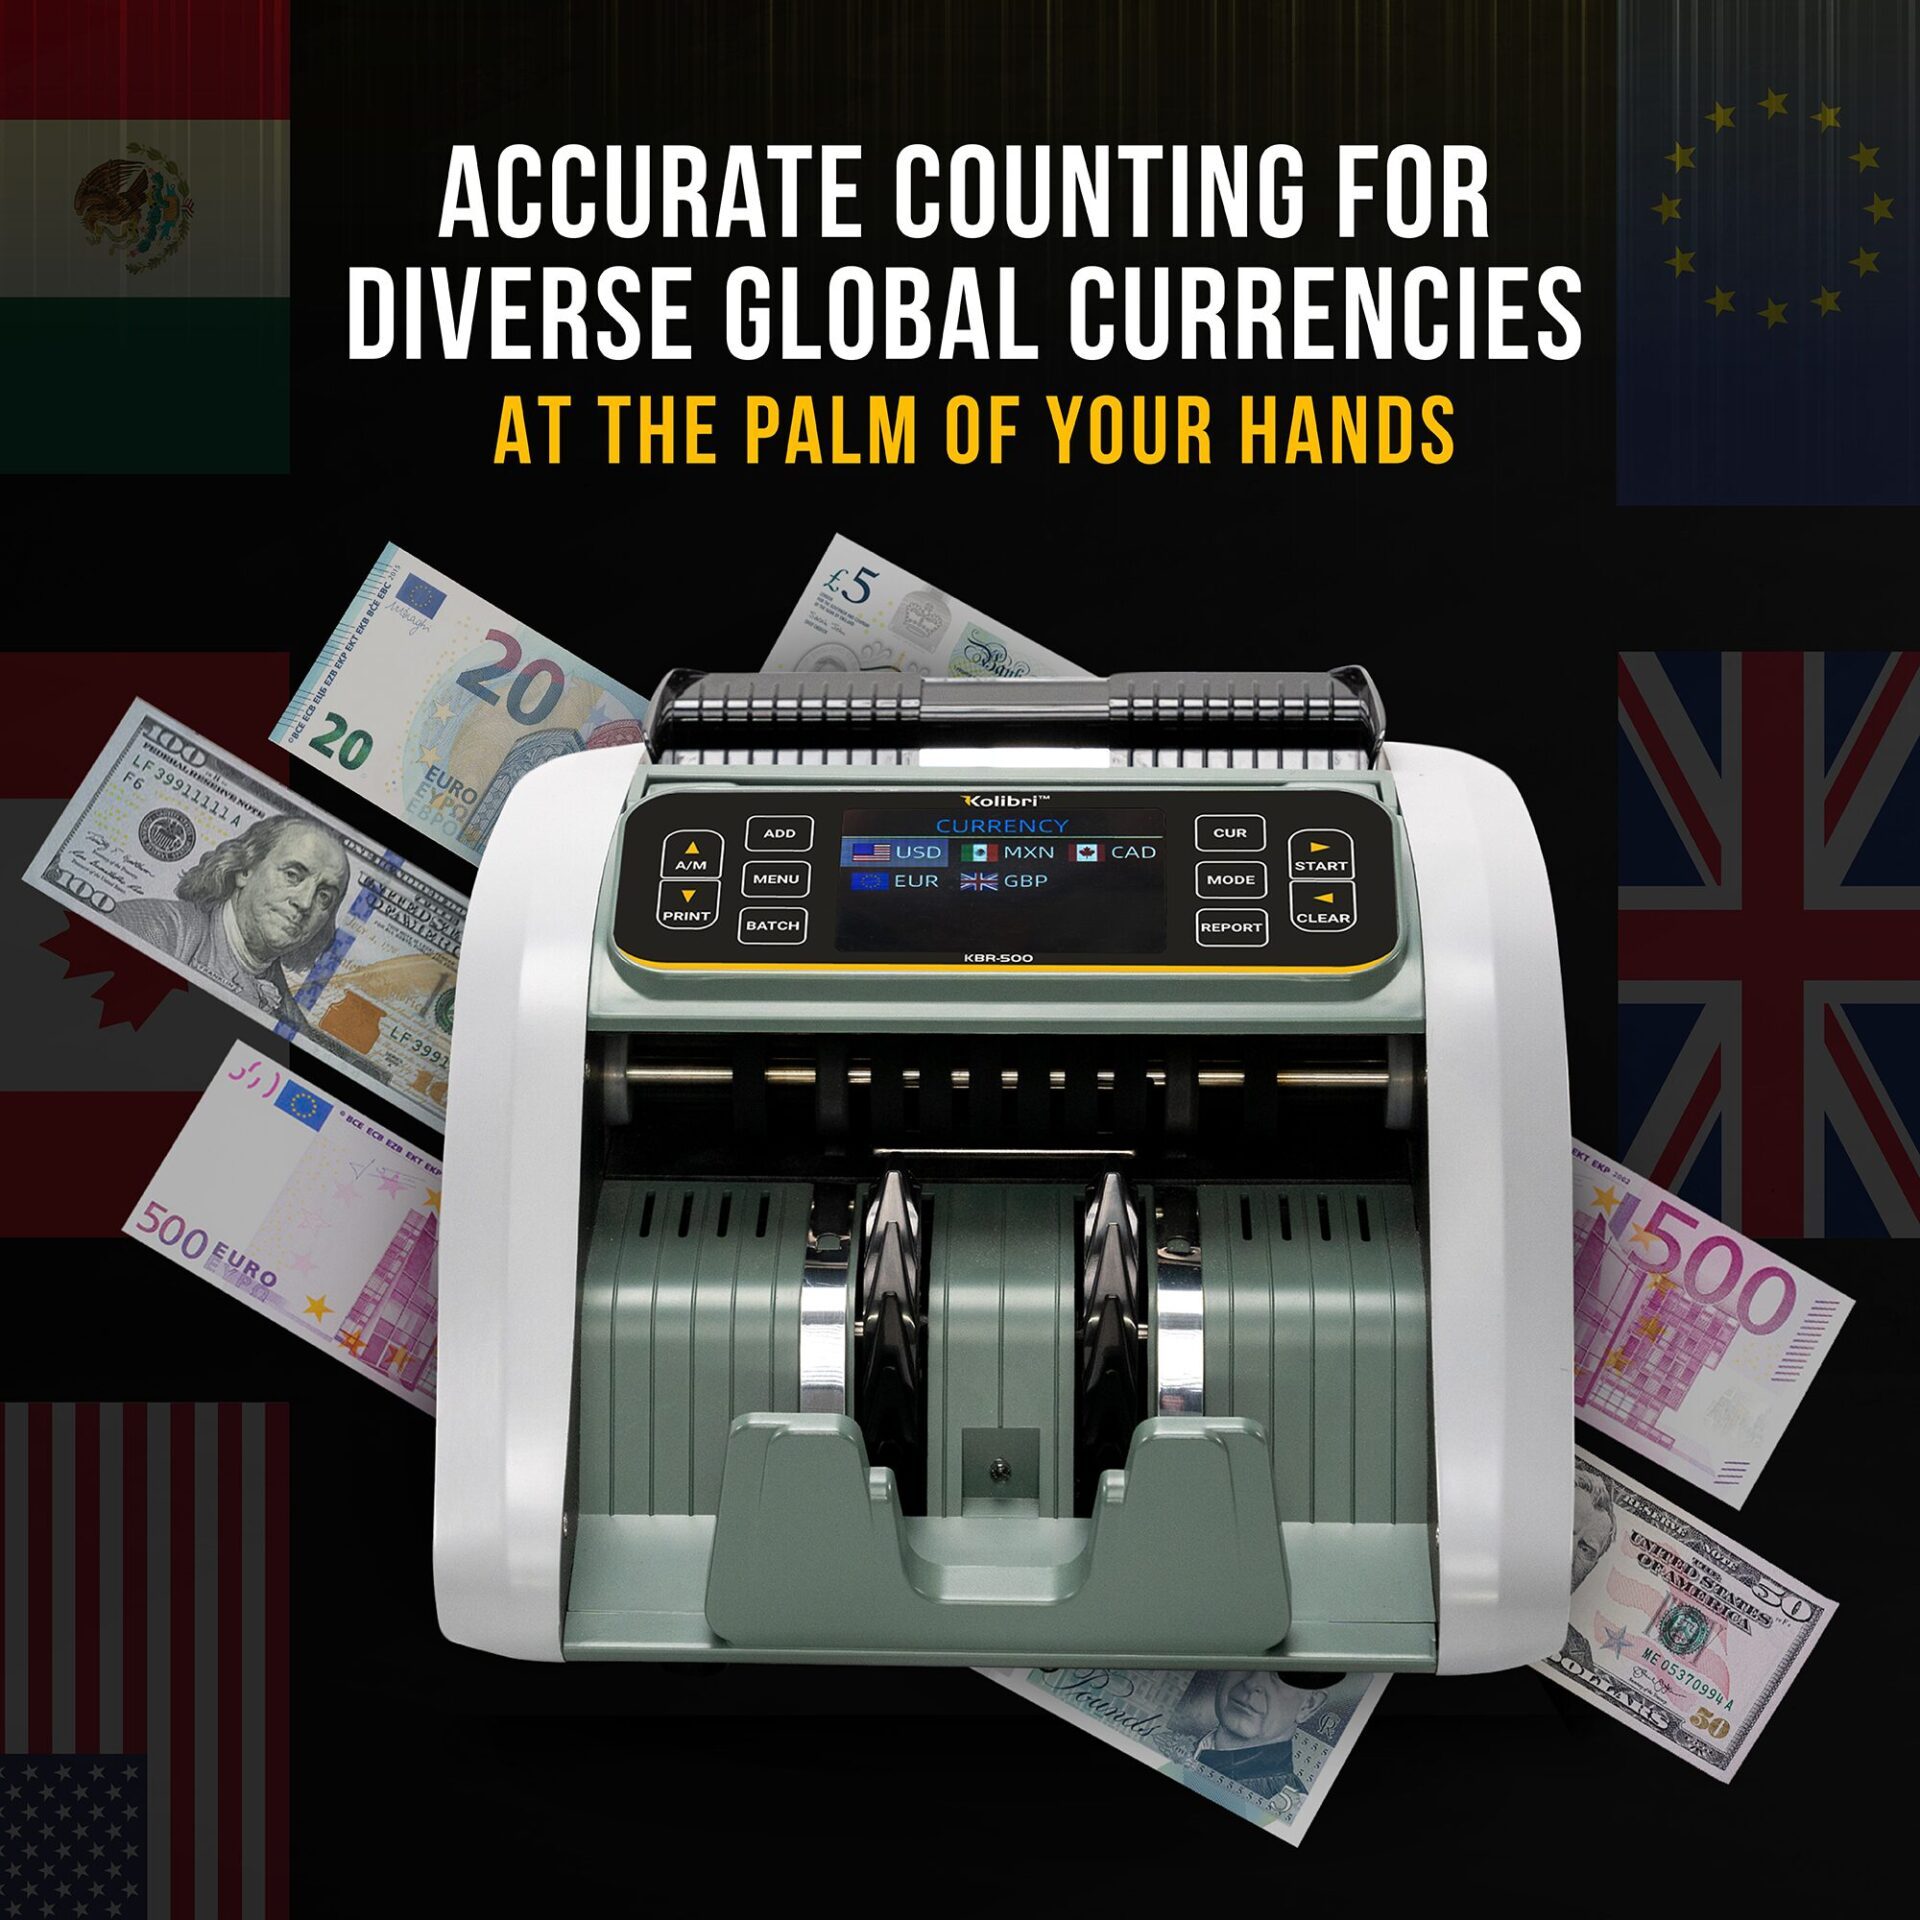 Accurate Counting for Diverse Globsal Currencies at the Palm of Your Hands